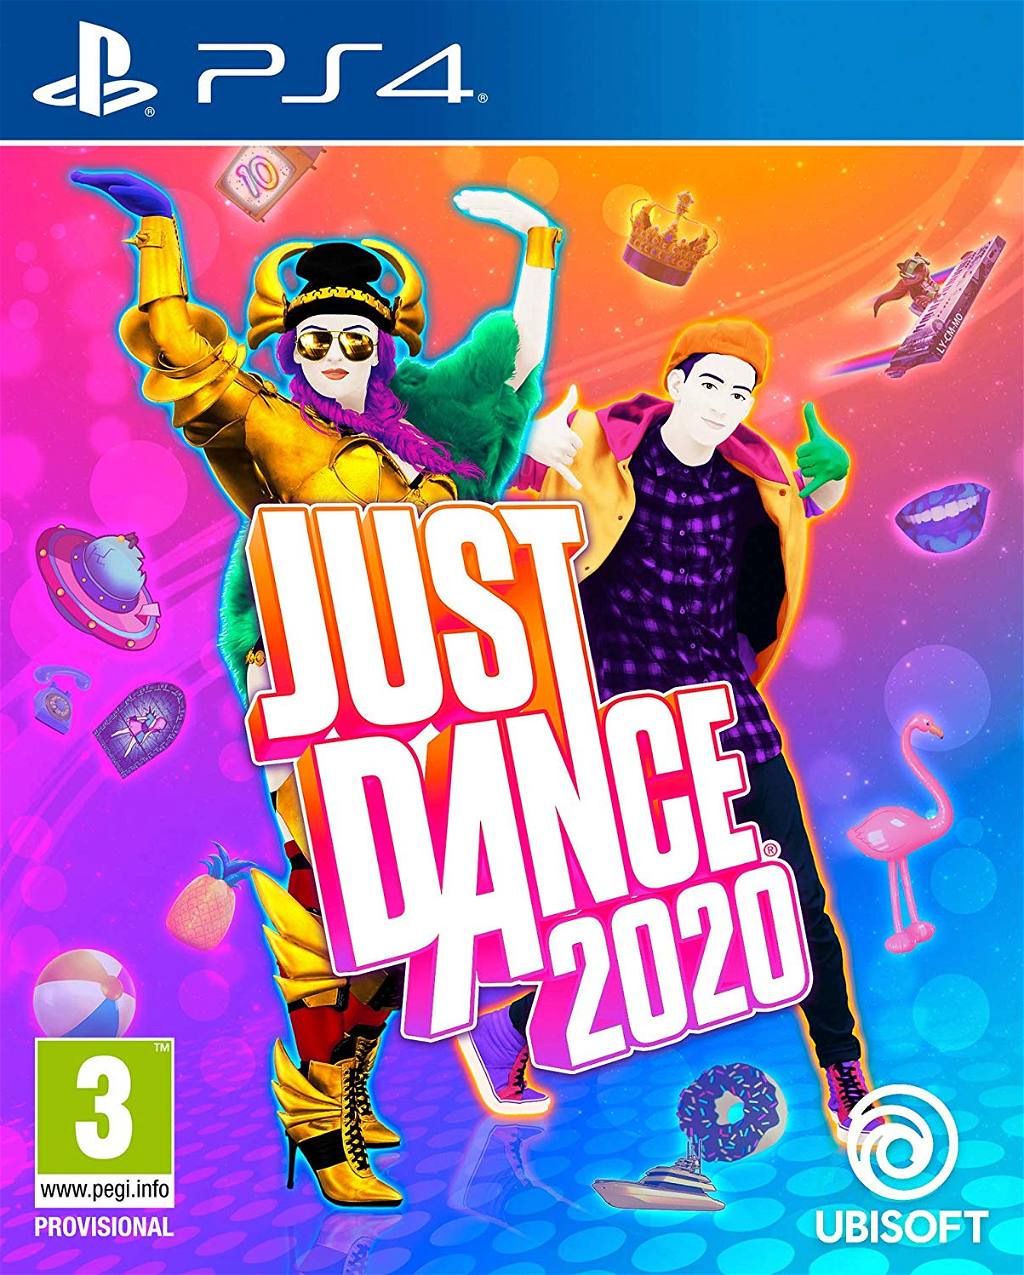 Just Dance 2020 for 4